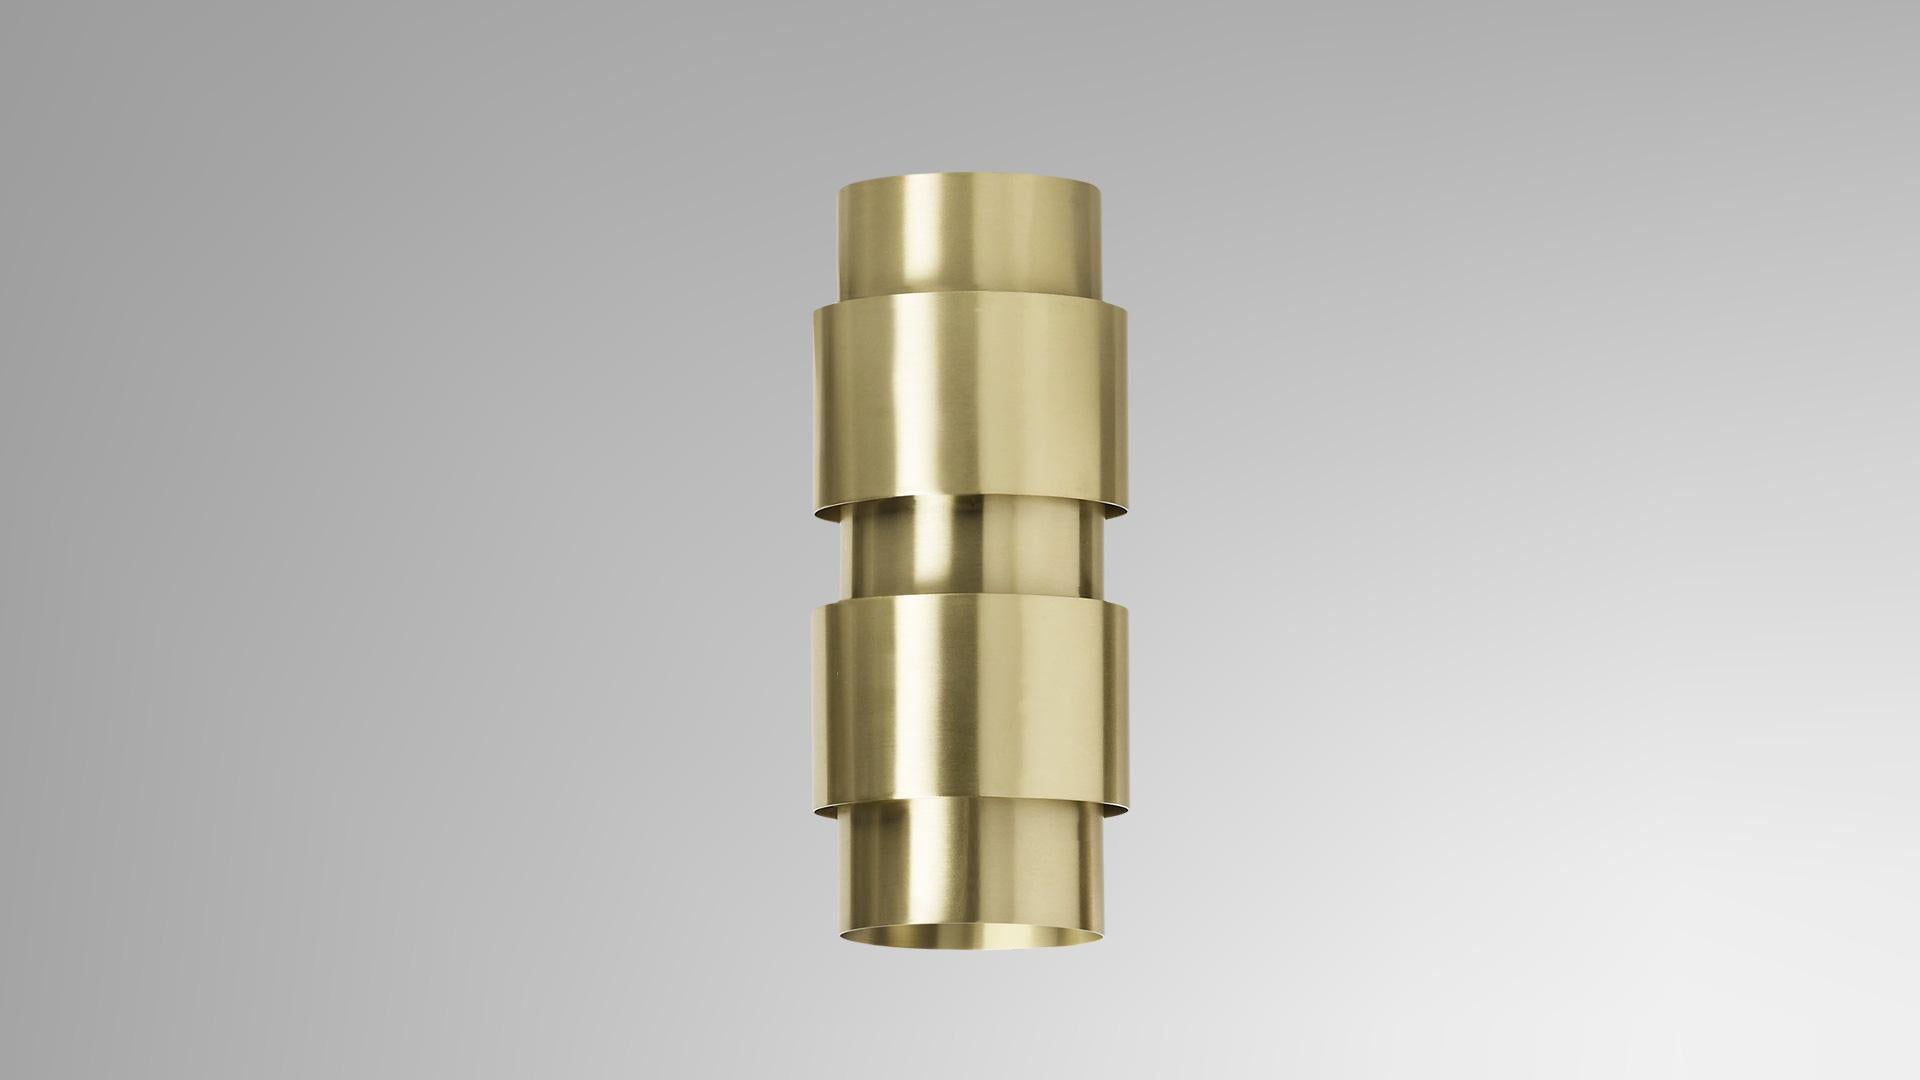 Ring wall-mount lamp by CTO Lighting
Materials: satin brass
Also available in bronze, satin nickel
Dimensions: H 30 x W 12 cm 

All our lamps can be wired according to each country. If sold to the USA it will be wired for the USA for instance.
Other